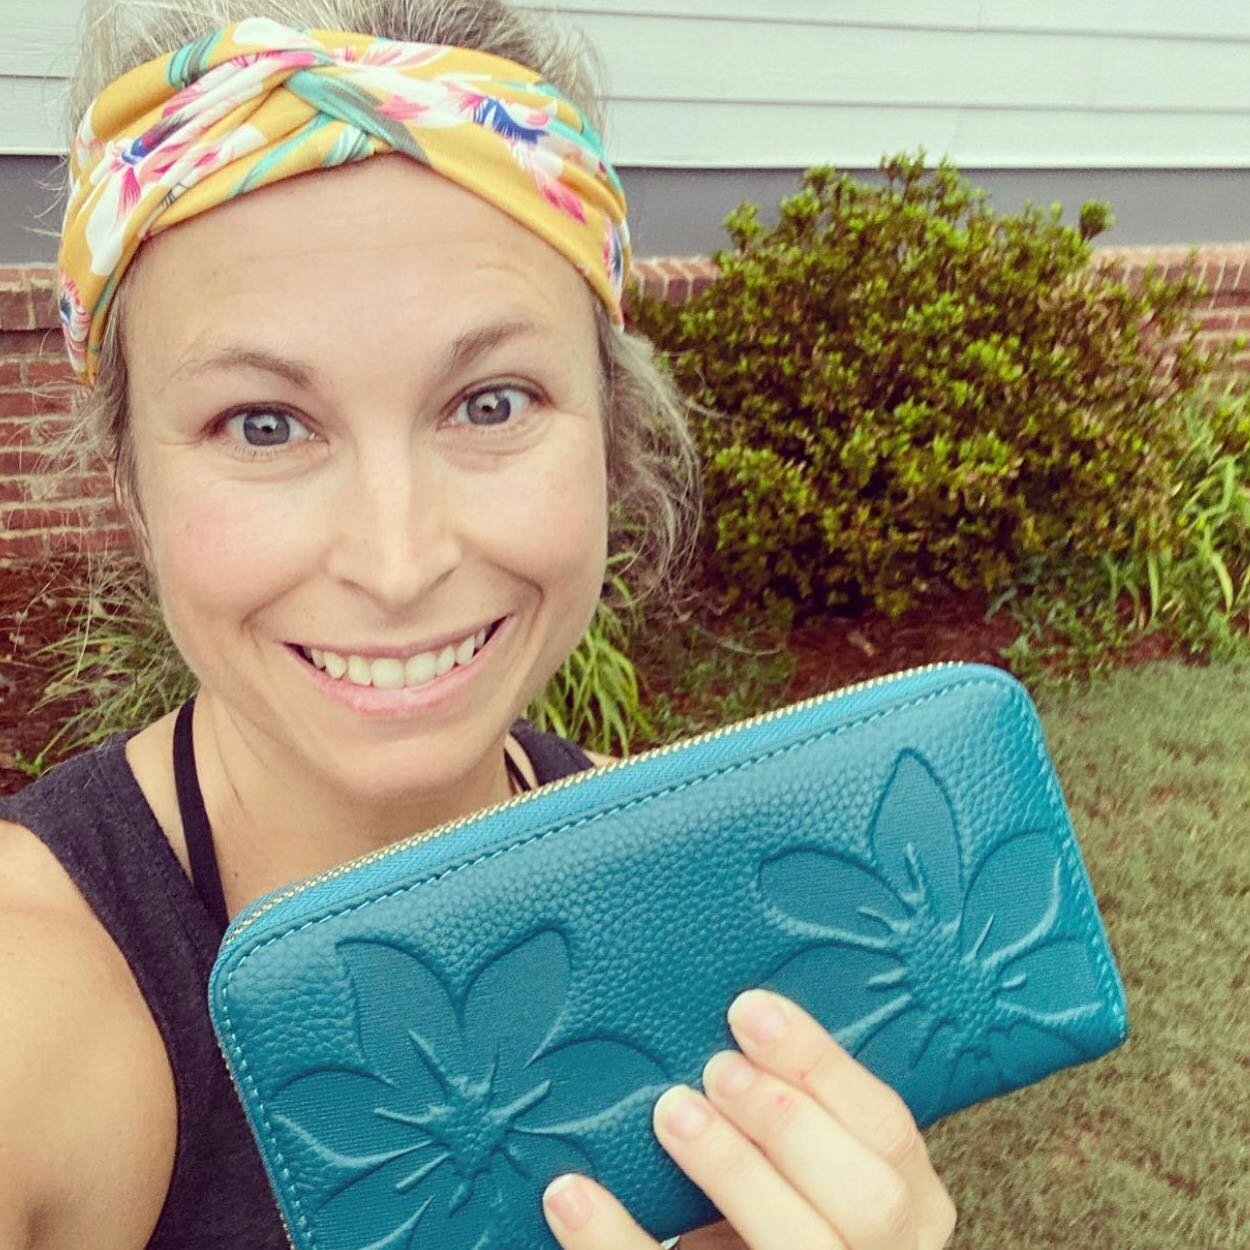 Happy Customer Alert! @whitparks writes &ldquo; This wallet is like a dream, I&rsquo;ve been searching for one like this for years! Functional and very pretty! &ldquo;. 

So happy you love it! New leather flower wallets are $39 with free shipping! &h